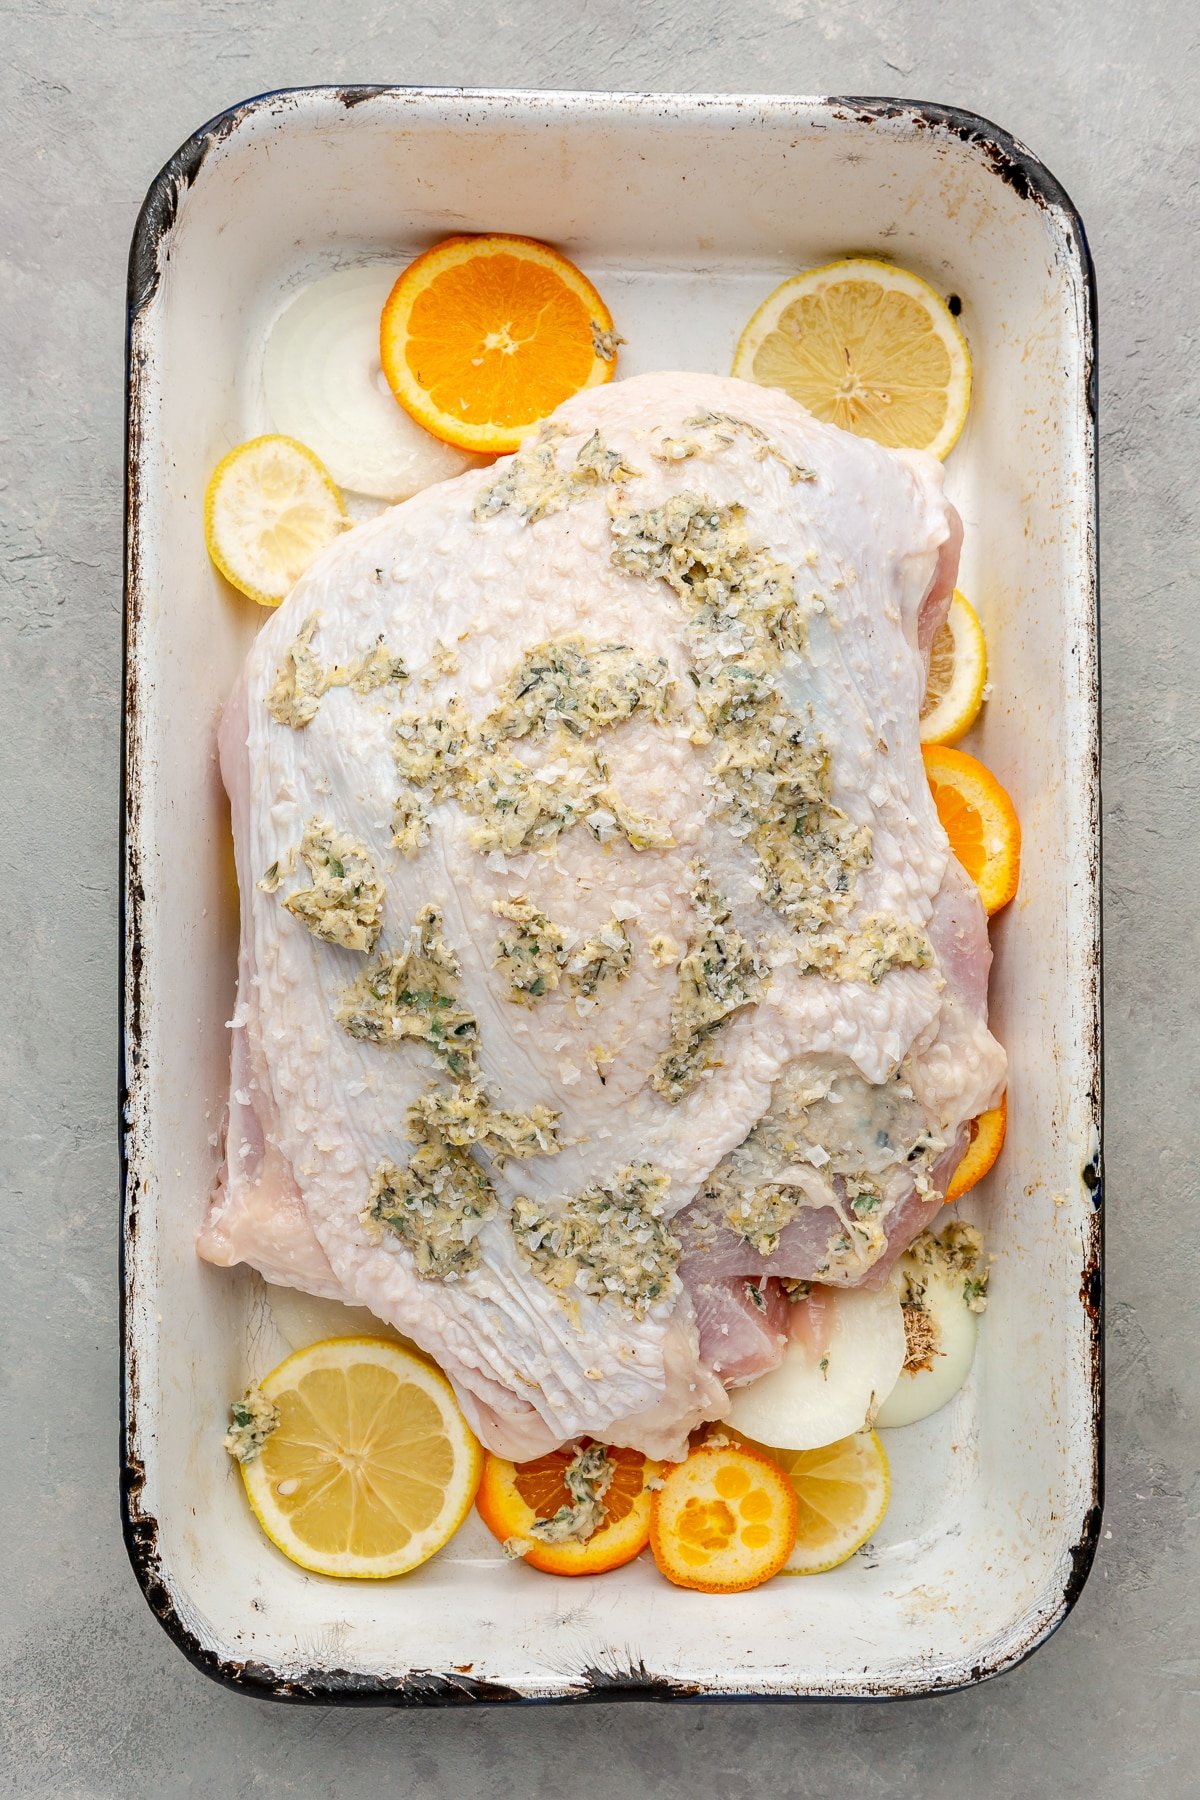 Raw turkey breast has been placed on top of the lemons, oranges, and onions. A variety of herbs and spices have been placed on top.